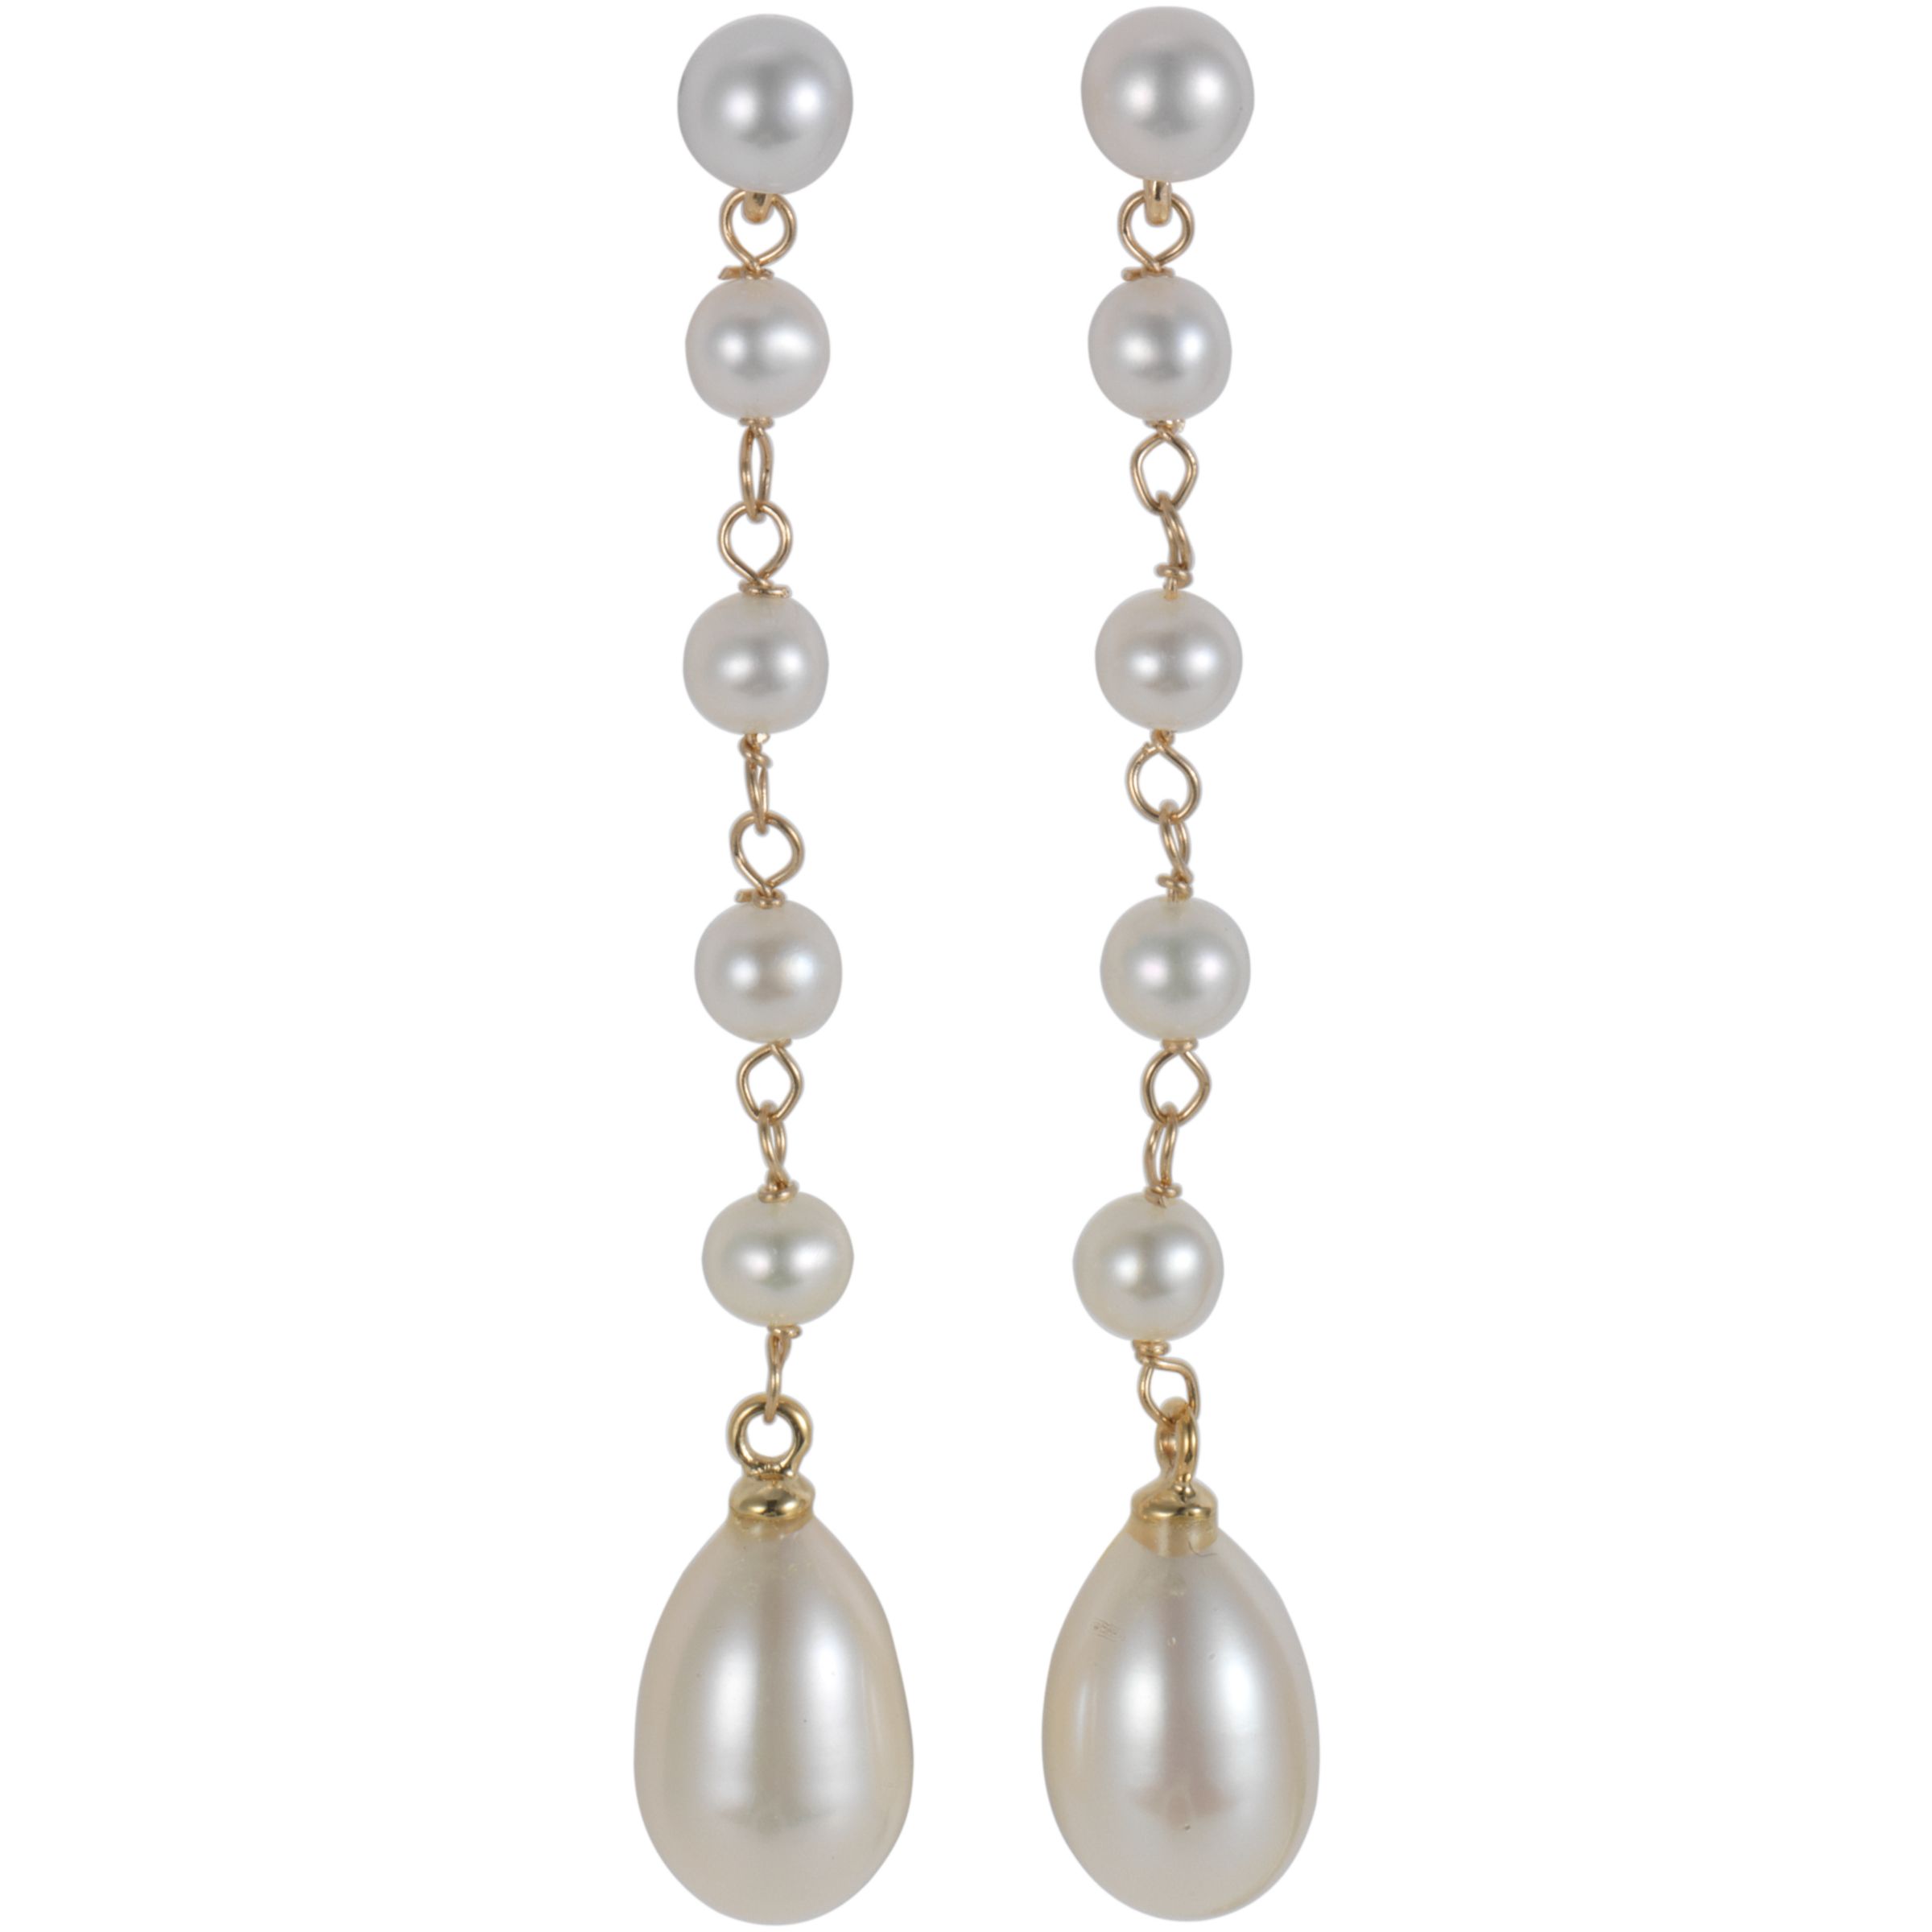 London Road 9ct Yellow Gold White Cultured Fresh Water Pearl Earrings at John Lewis